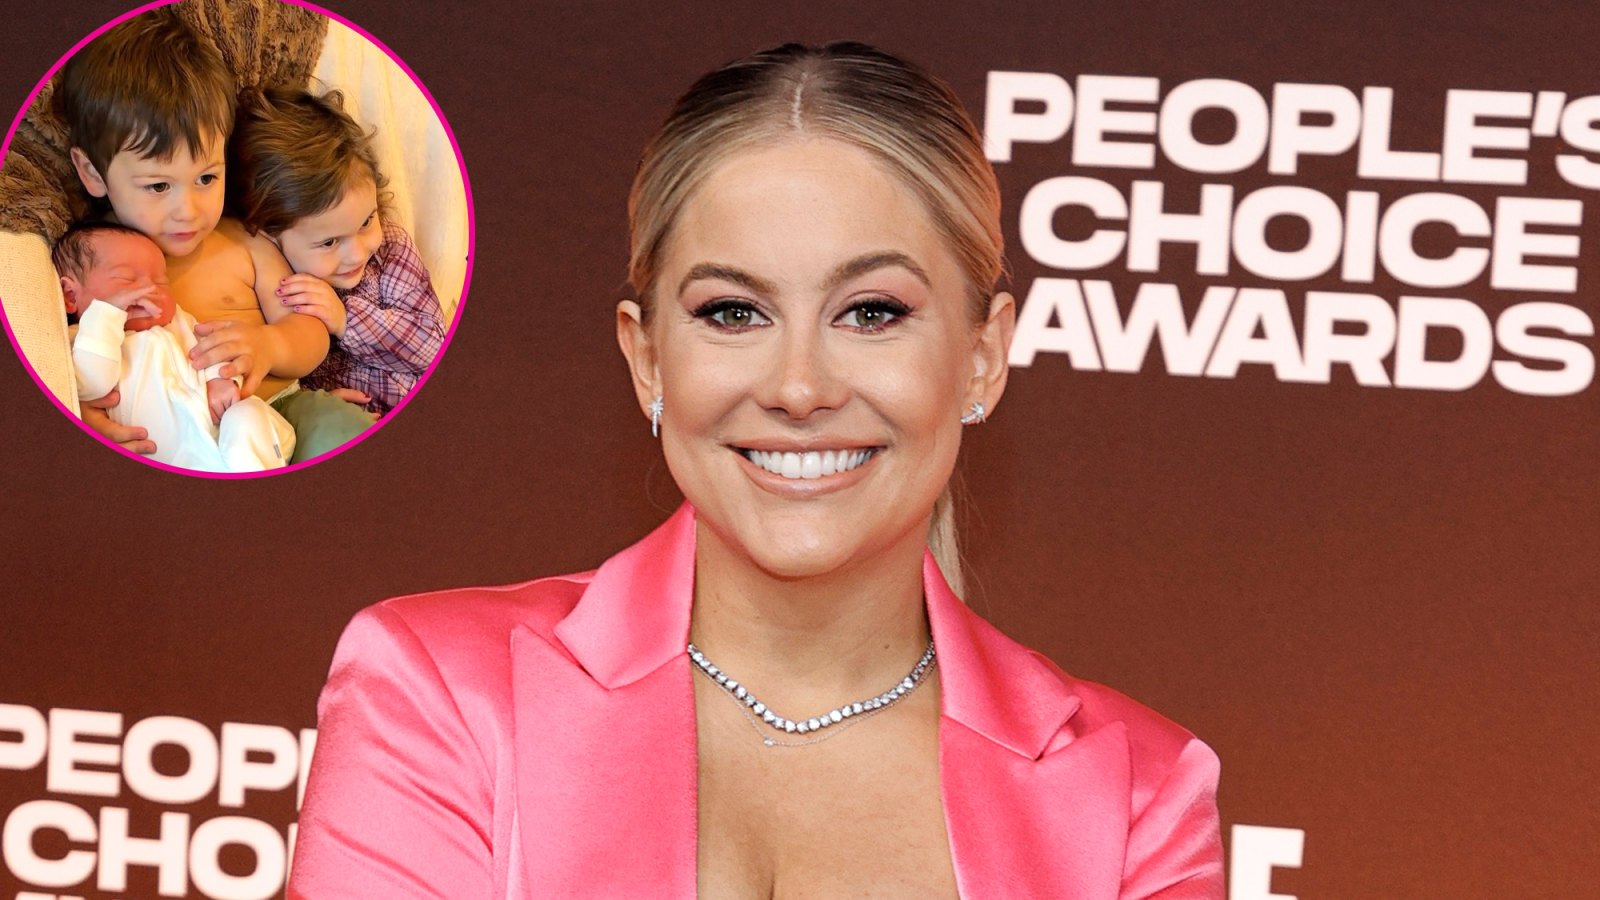 Shawn Johnson Confesses She ‘Misses Her Big Babies’ as She Tends to Her Newborn